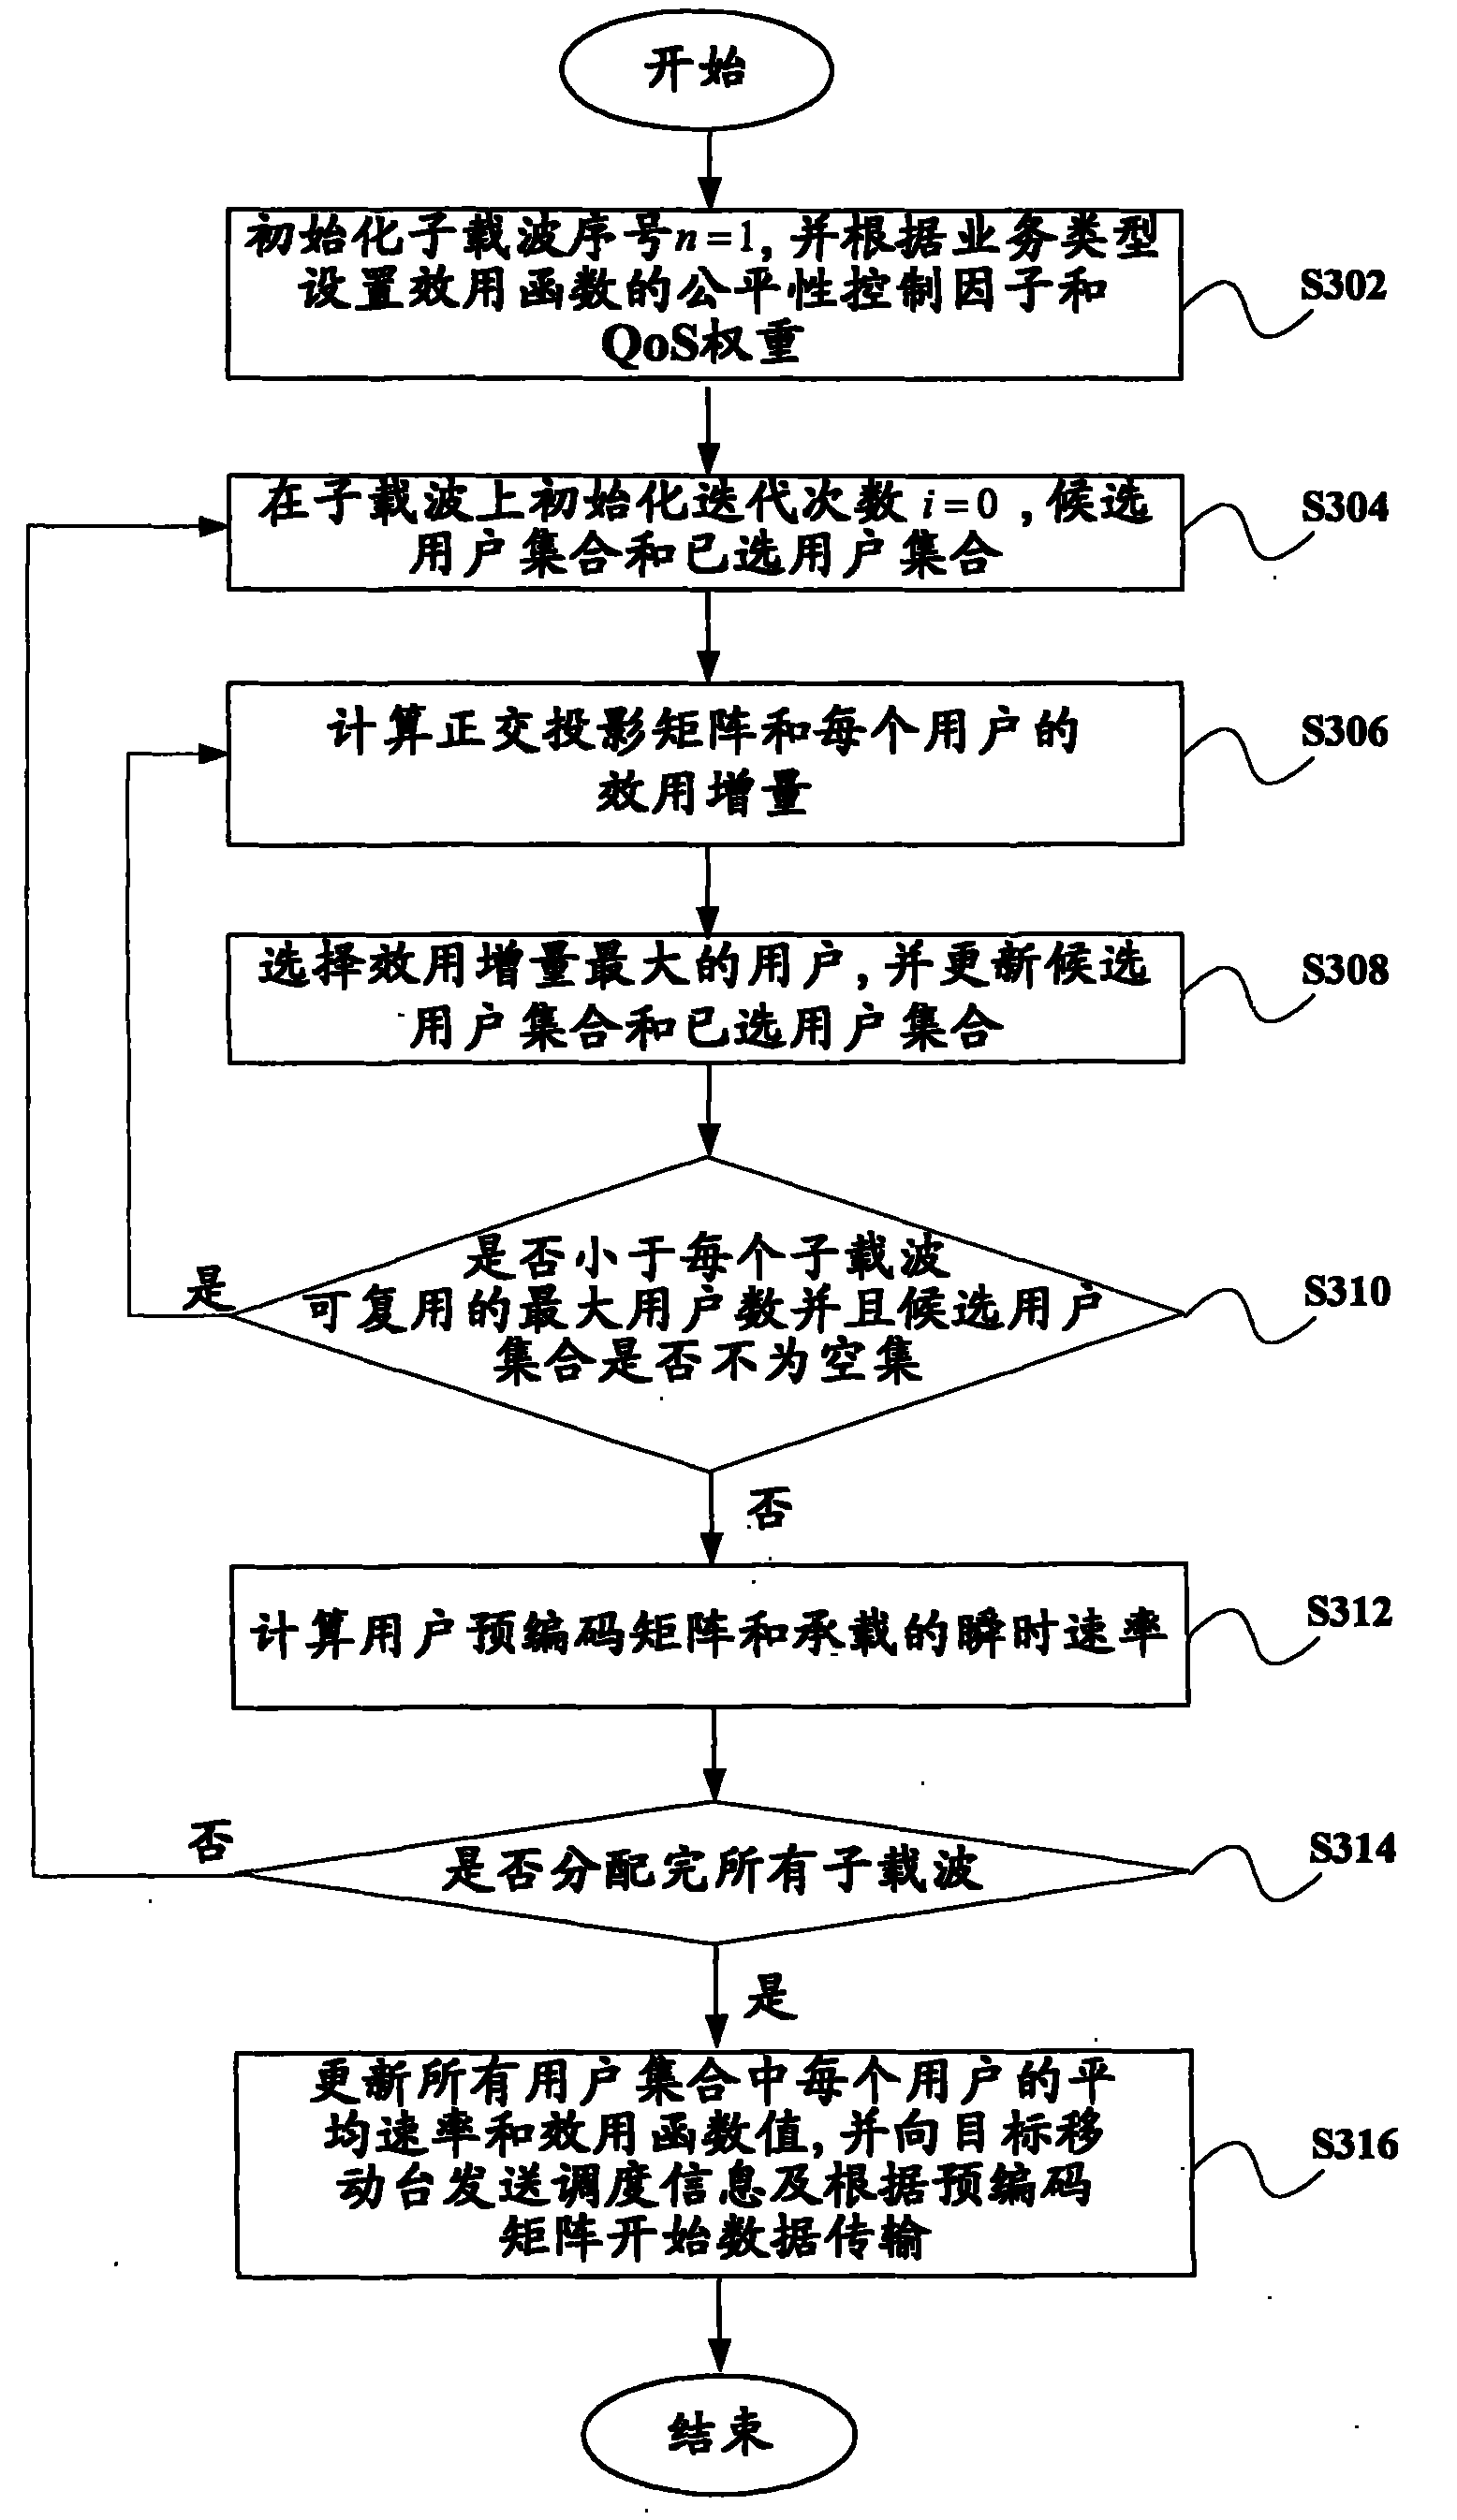 Downlink multiuser scheduling method, device and base station